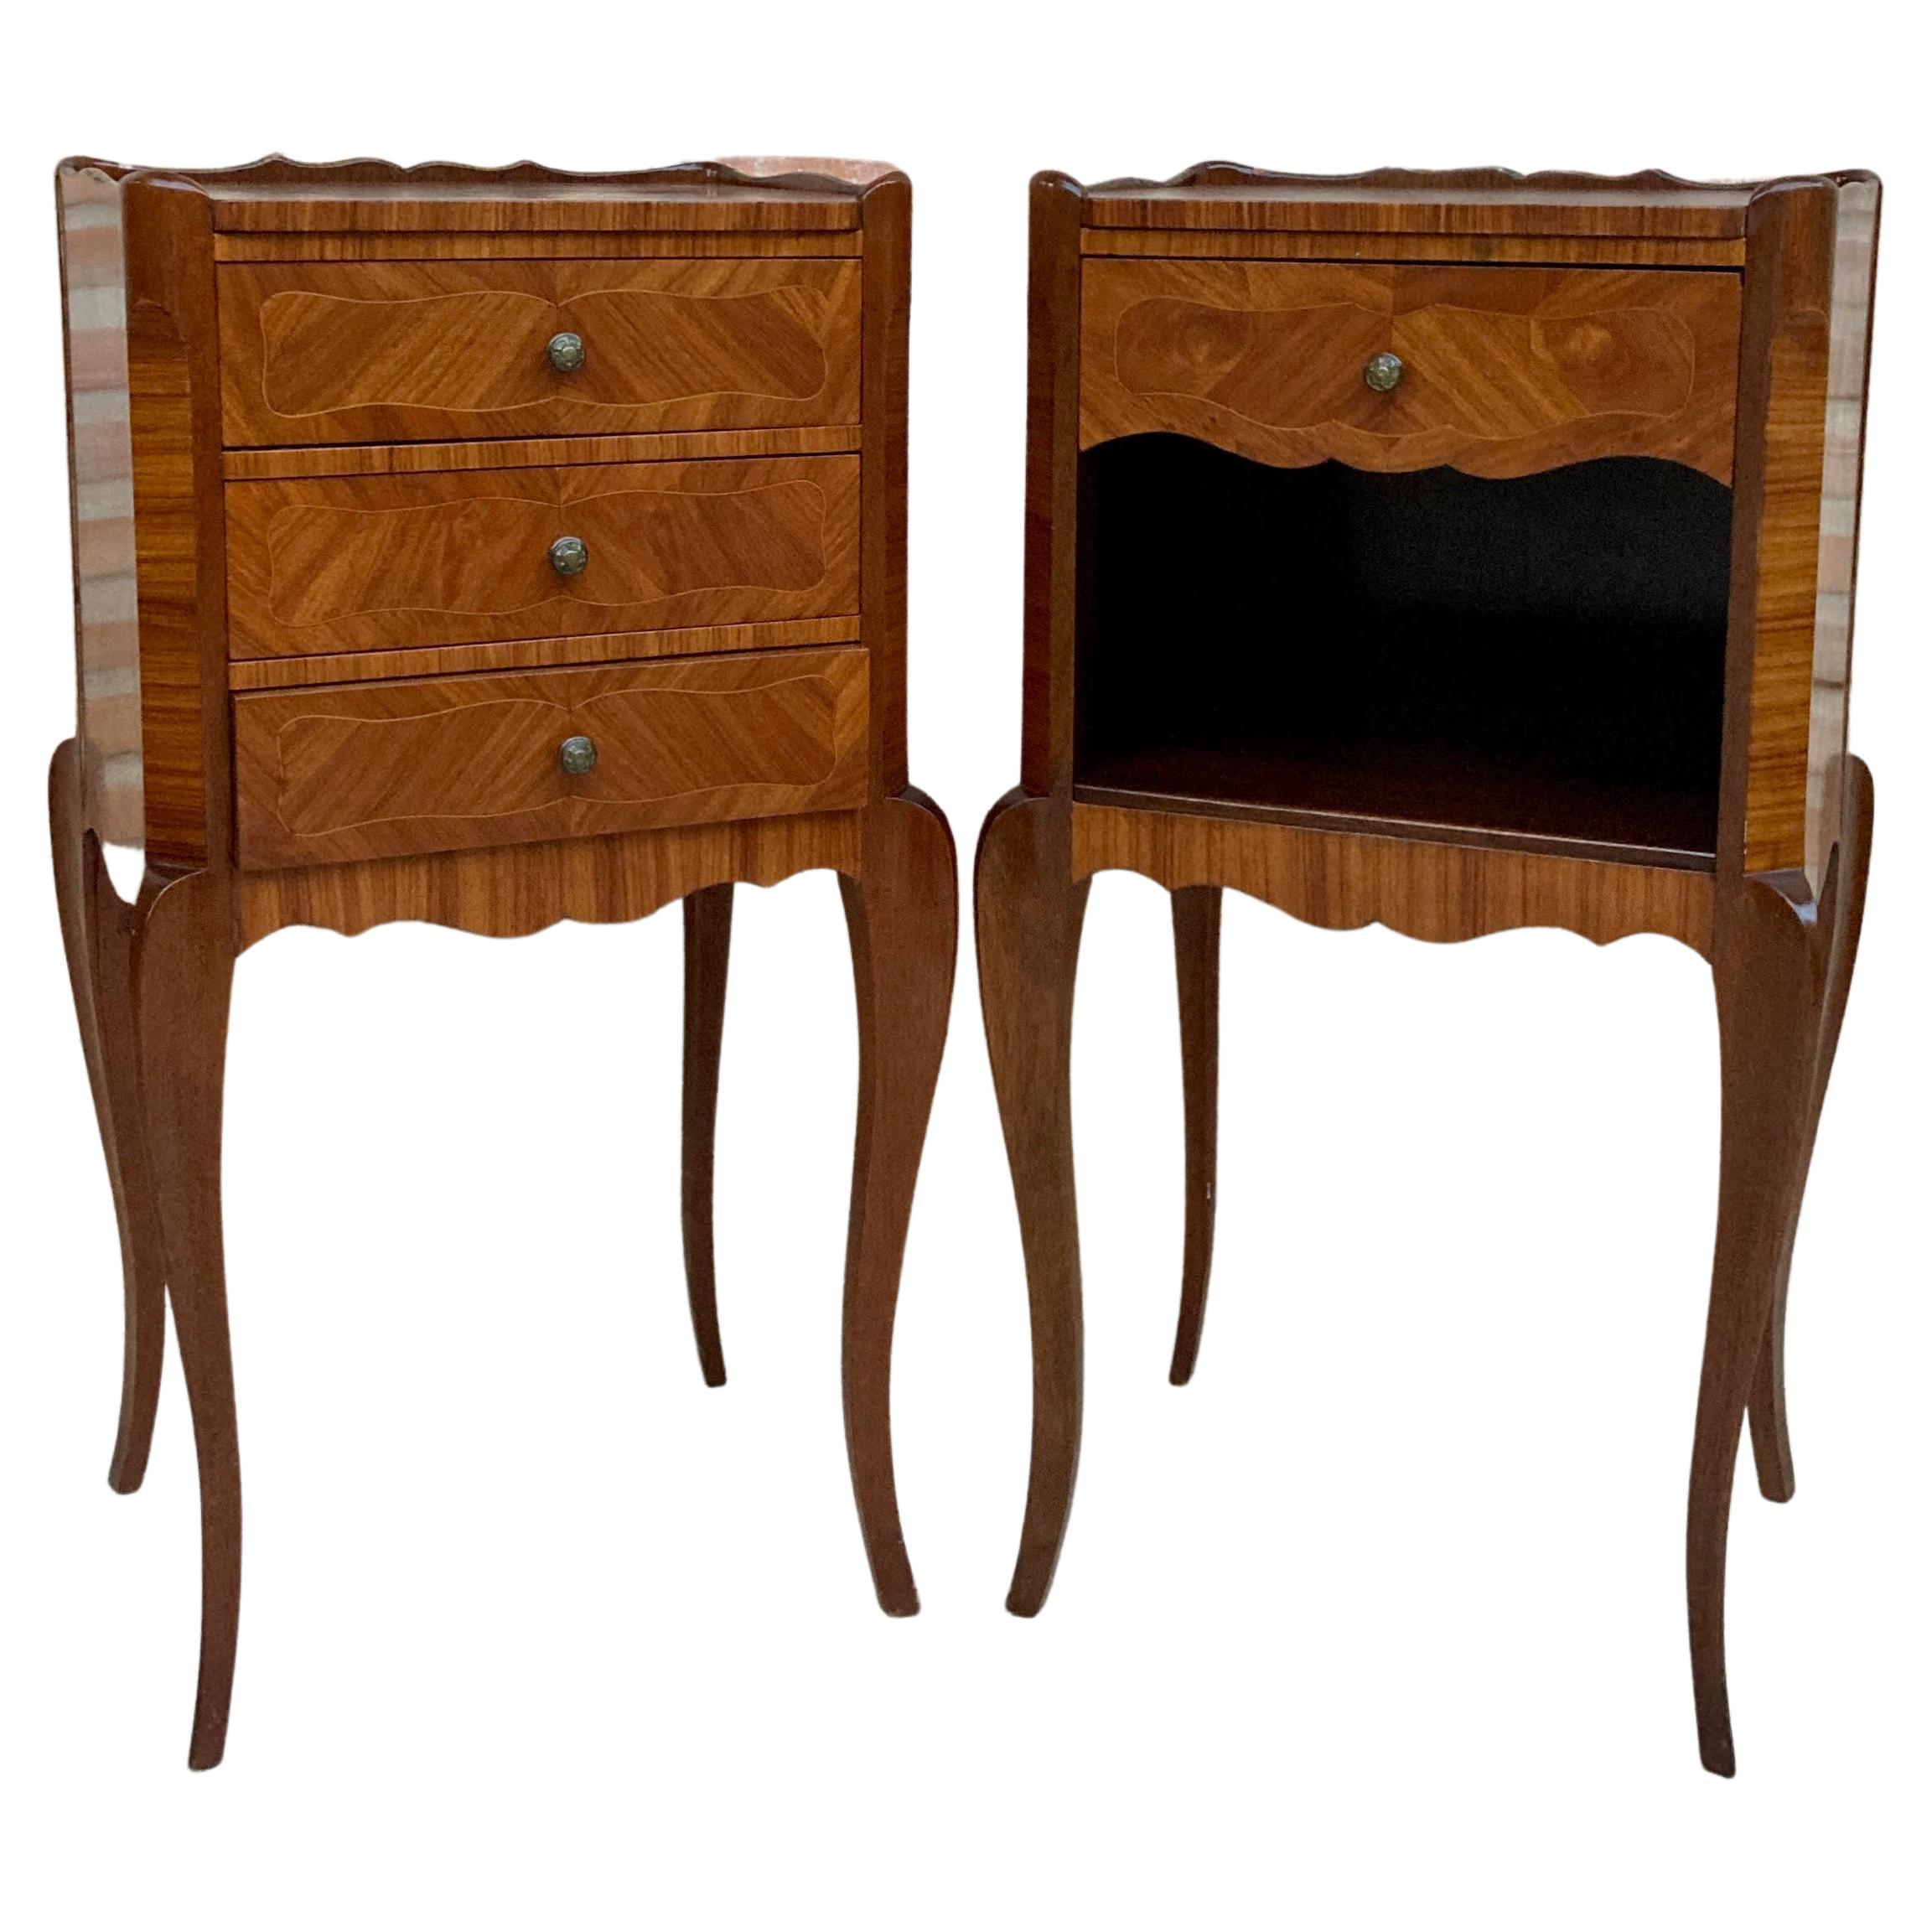 Early 20th Century French Marquetry And Iron Hardware Bedside Tables Or Nightsta